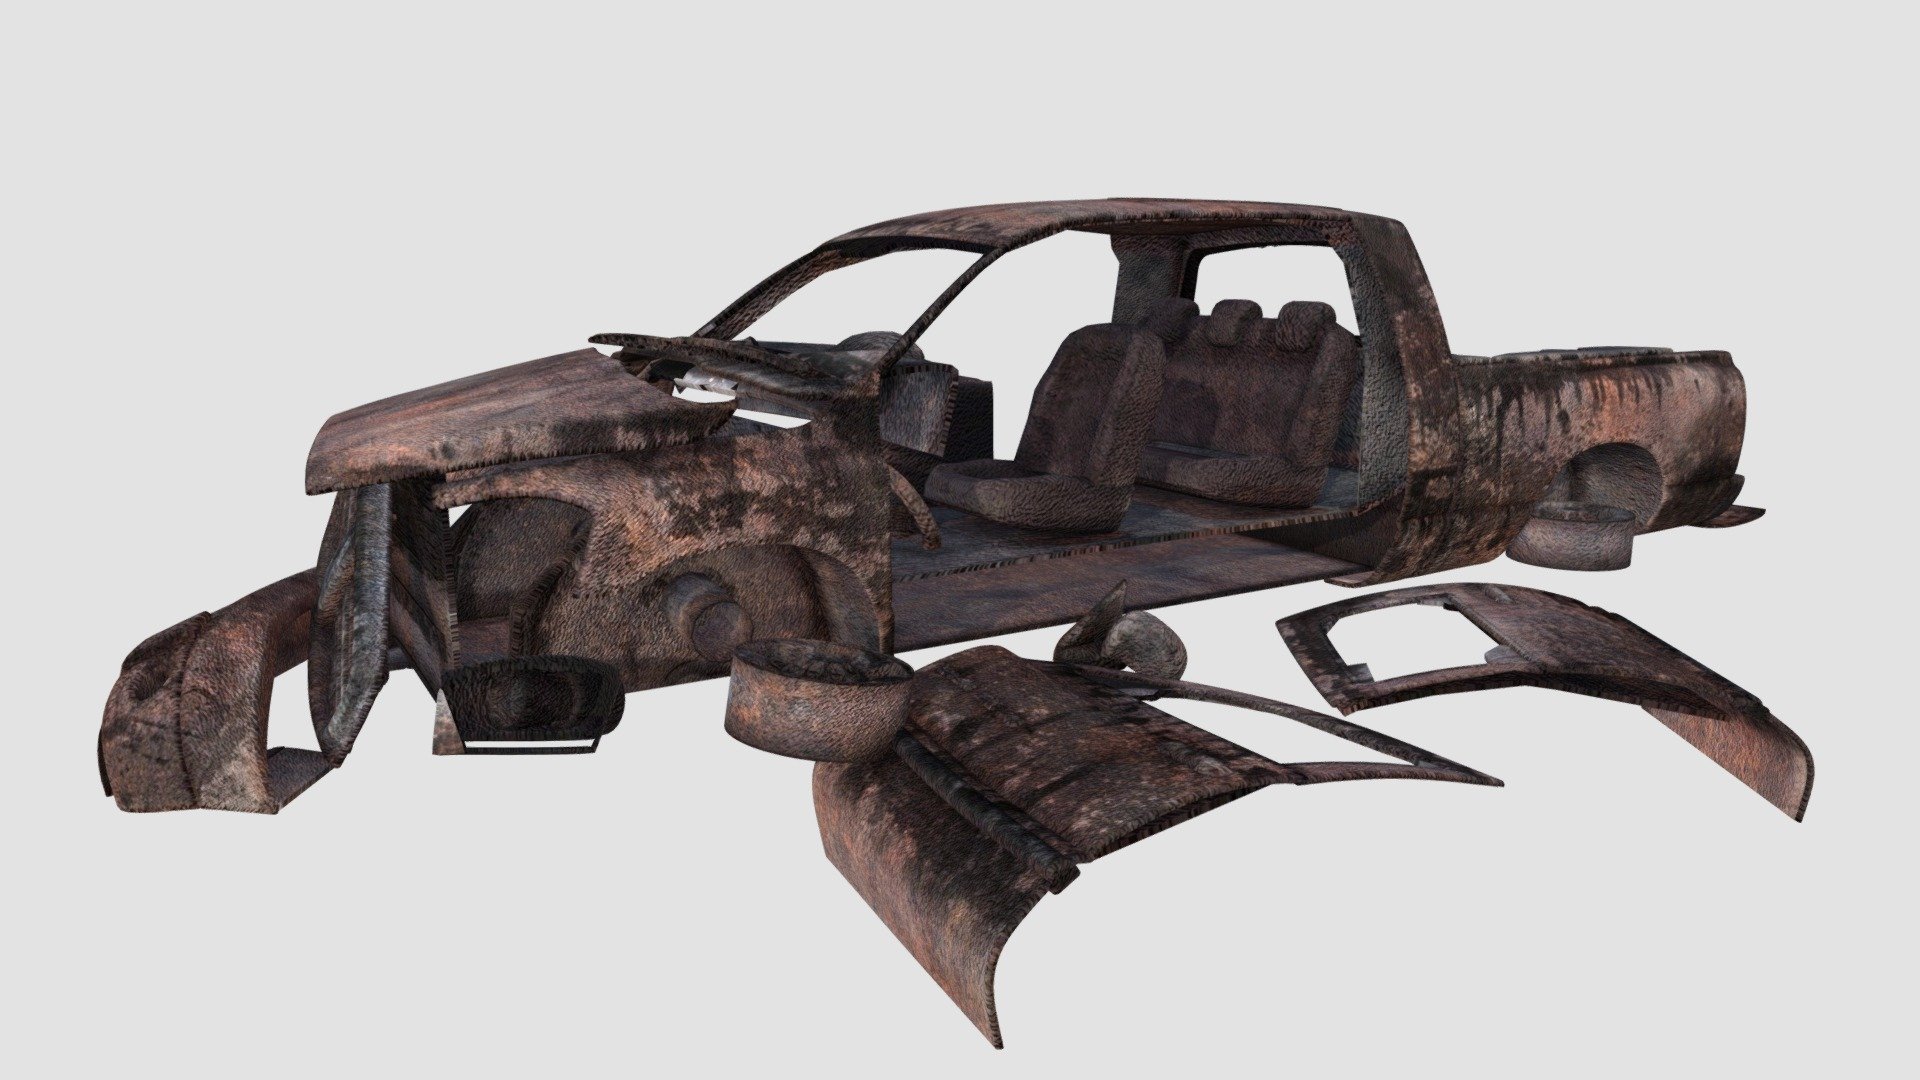 Highly detailed 3d model of destroyed car with all textures, shaders and materials. It is ready to use, just put it into your scene 3d model